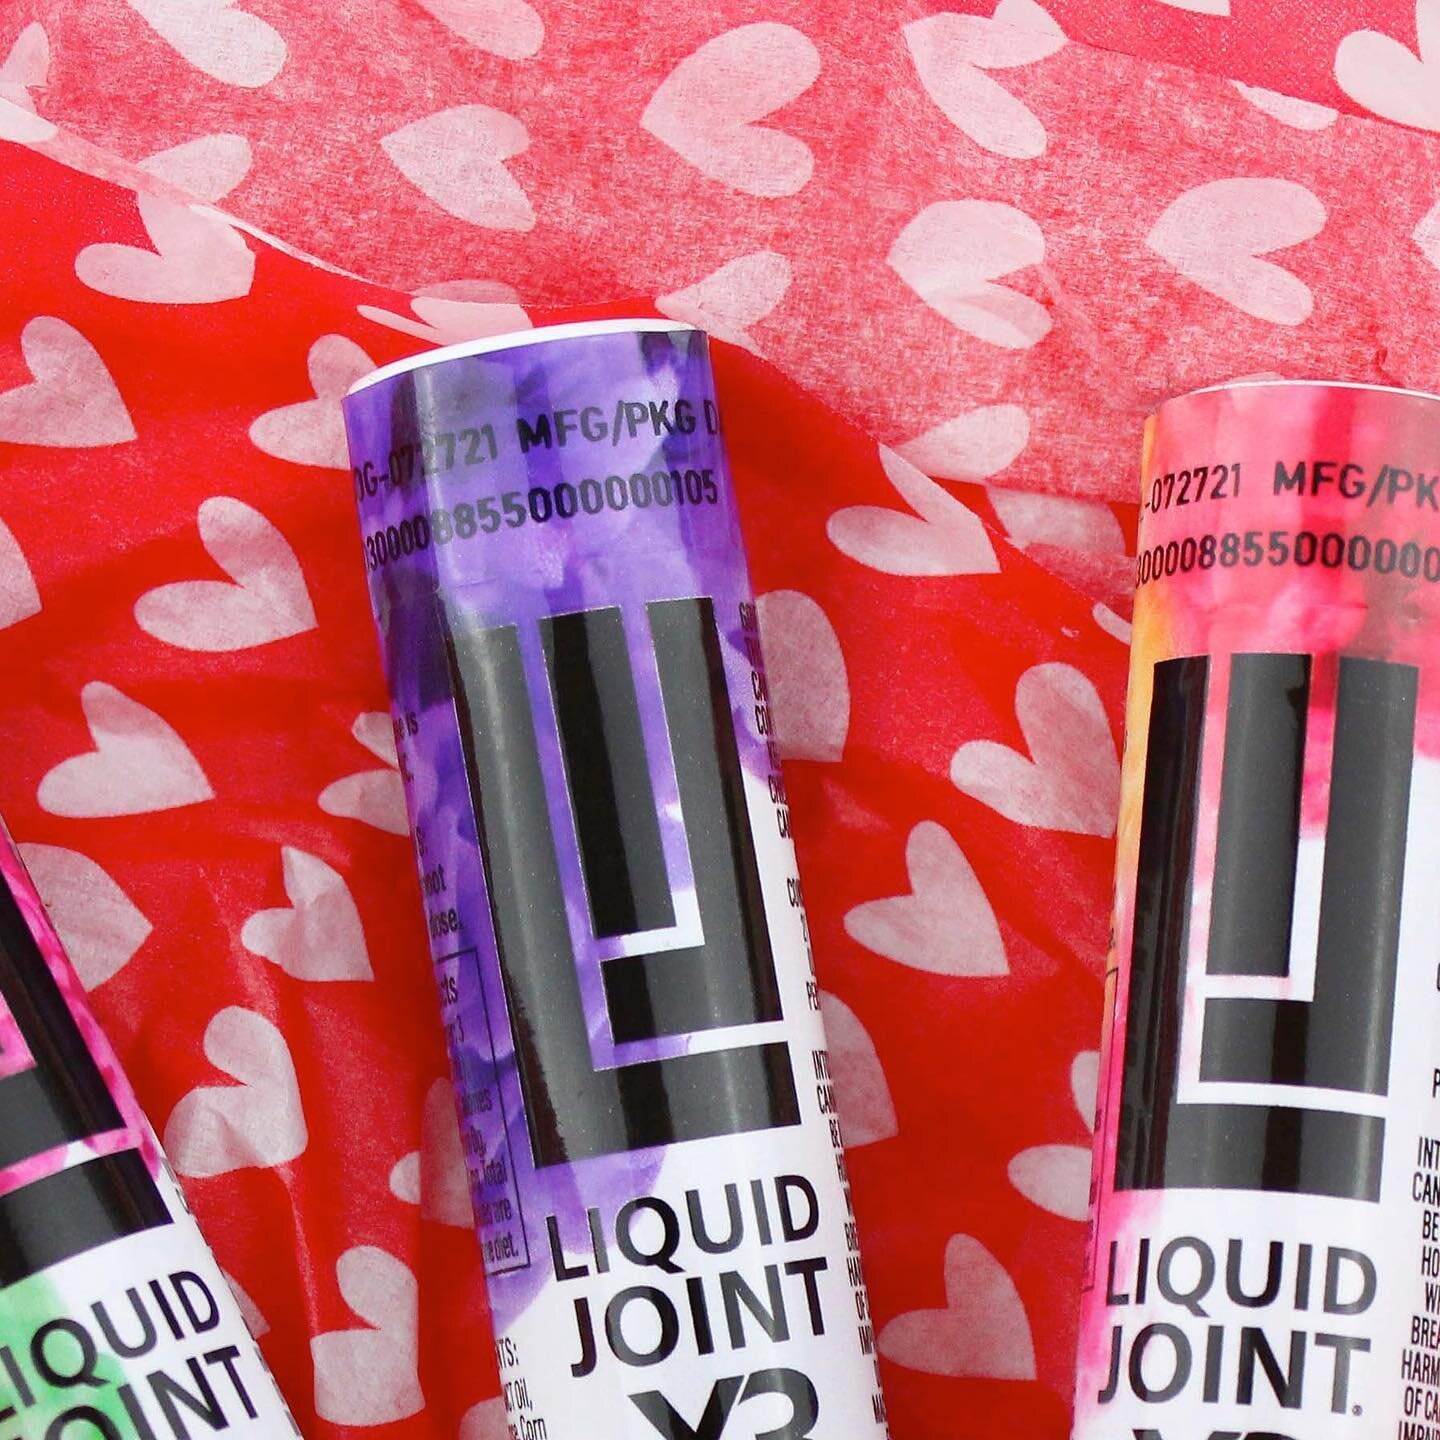 Give your lover the gift of Liquid Joint this Valentine&rsquo;s Day 💝💐 
#litbyliquid #LJallday #poweredby3C #shakeandshoot #mixandmingle #nanotechnology